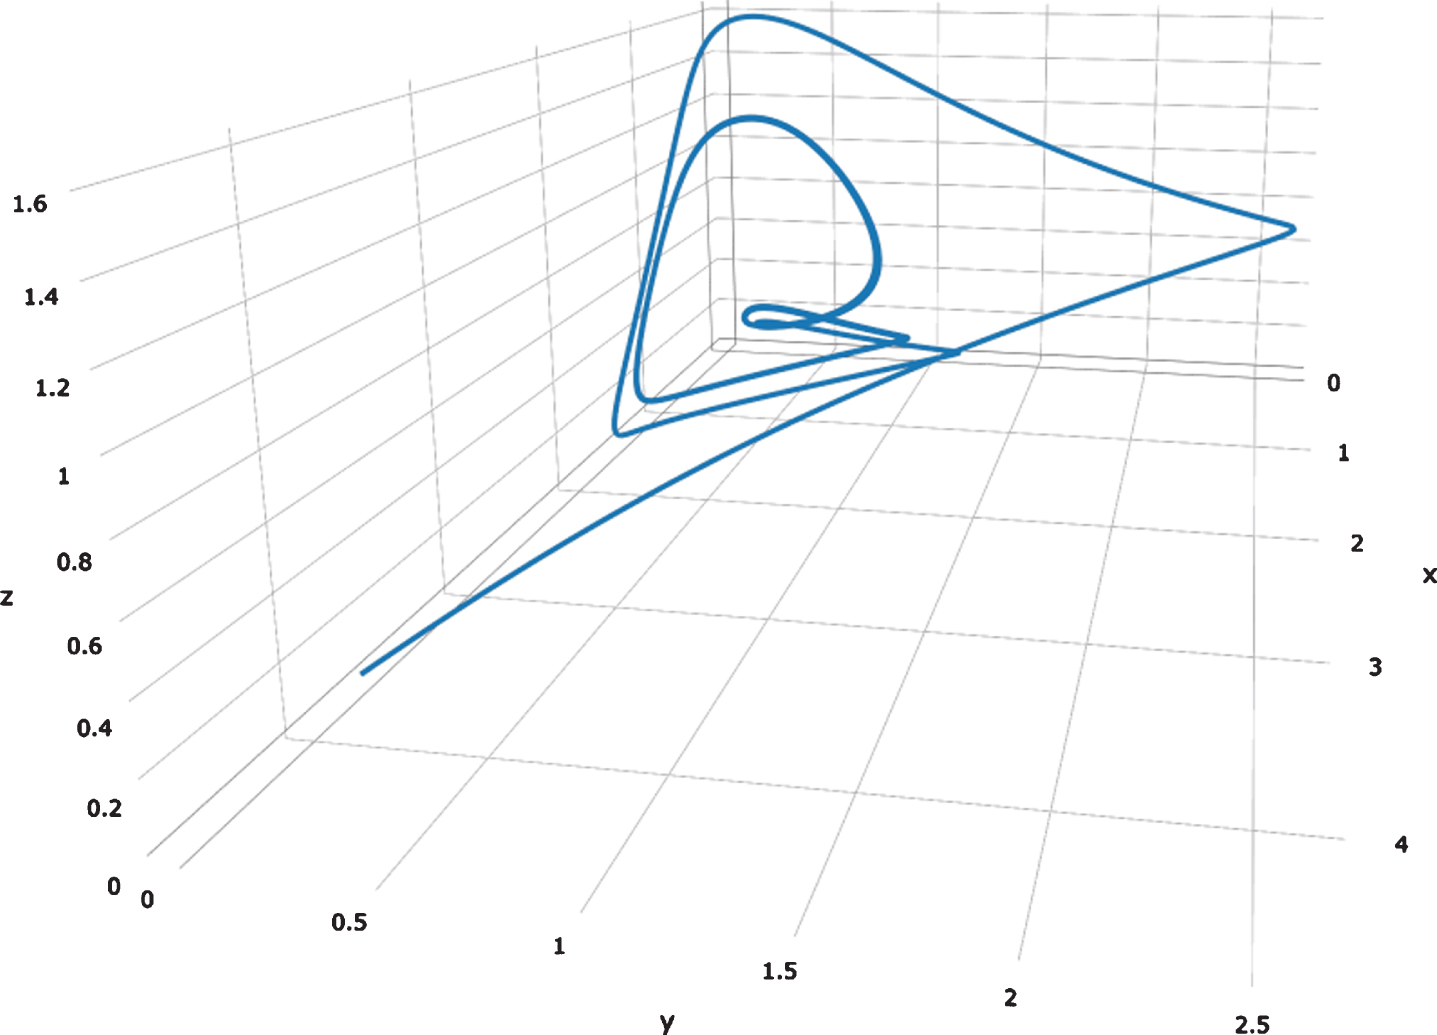 Manifold plot of forced model in [19]. Note the strange attractor is distinct from the one given in the paper.